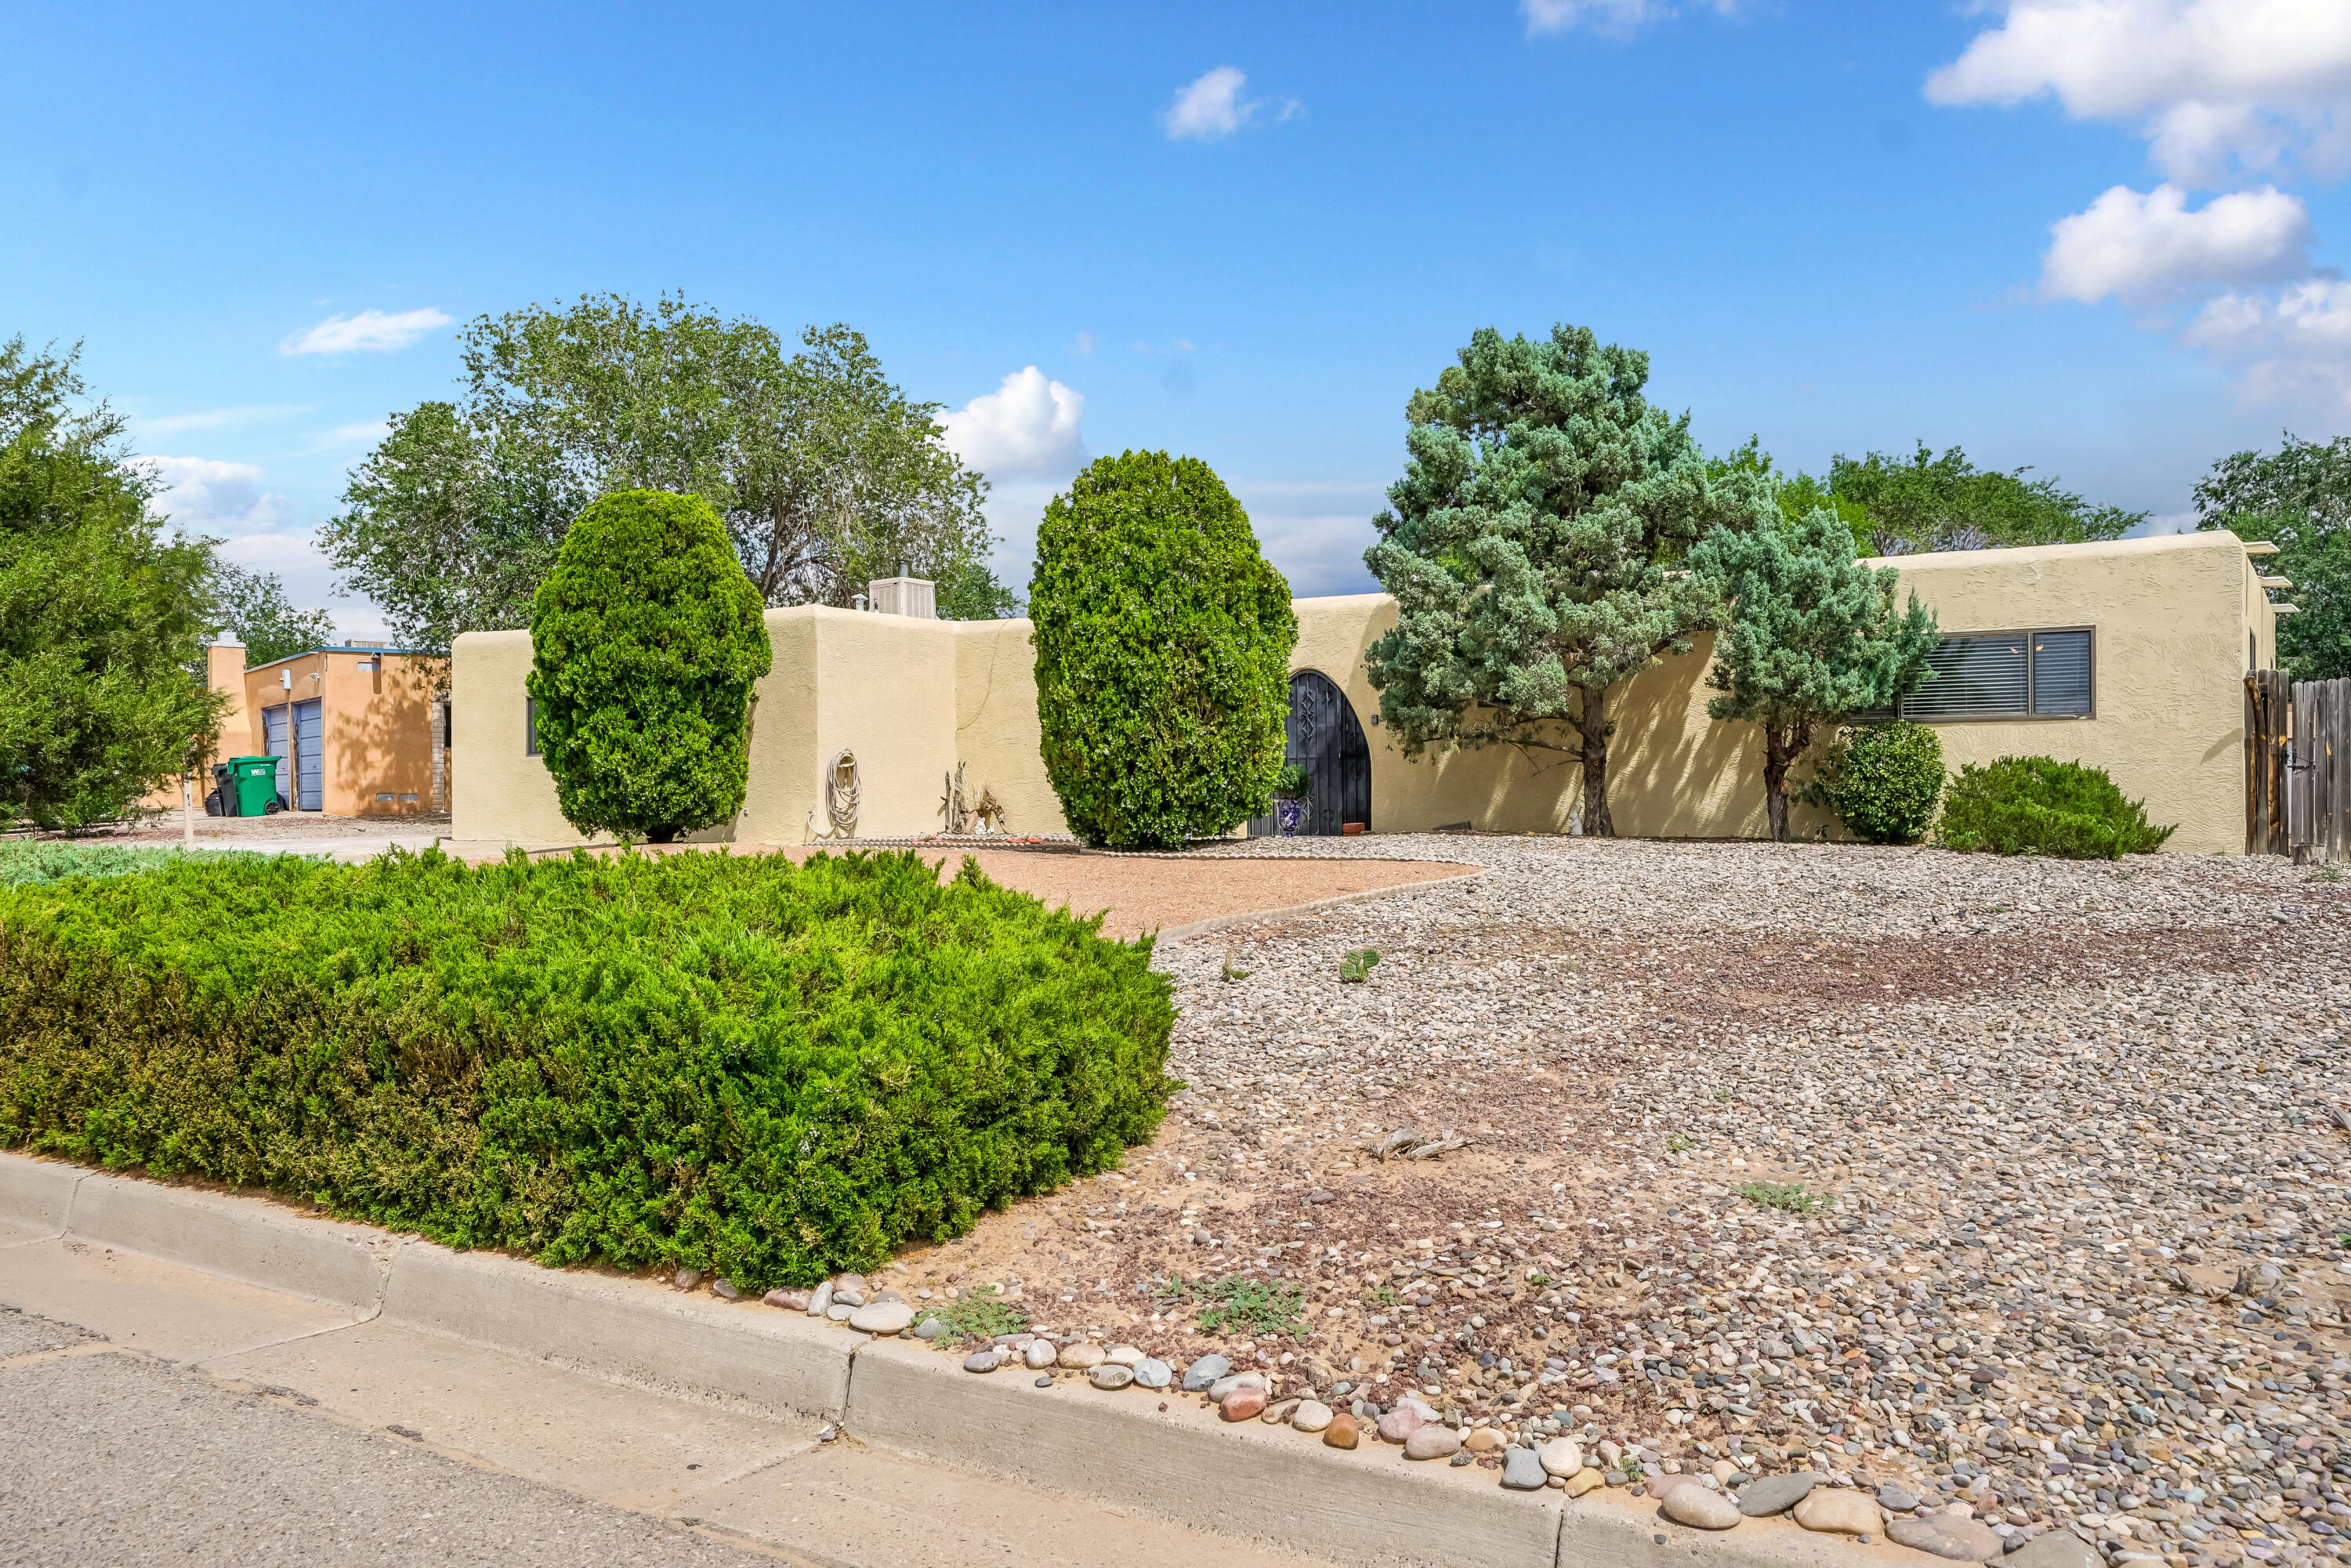 Multi-generational housing in the heart of Rio Rancho.  Walking distance to grocery stores and restaurants.  This home sits on a large lot and is ready for a new owner!  Home requires some updating and is priced accordingly.  TPO roof.  Do not miss your chance at a great home!